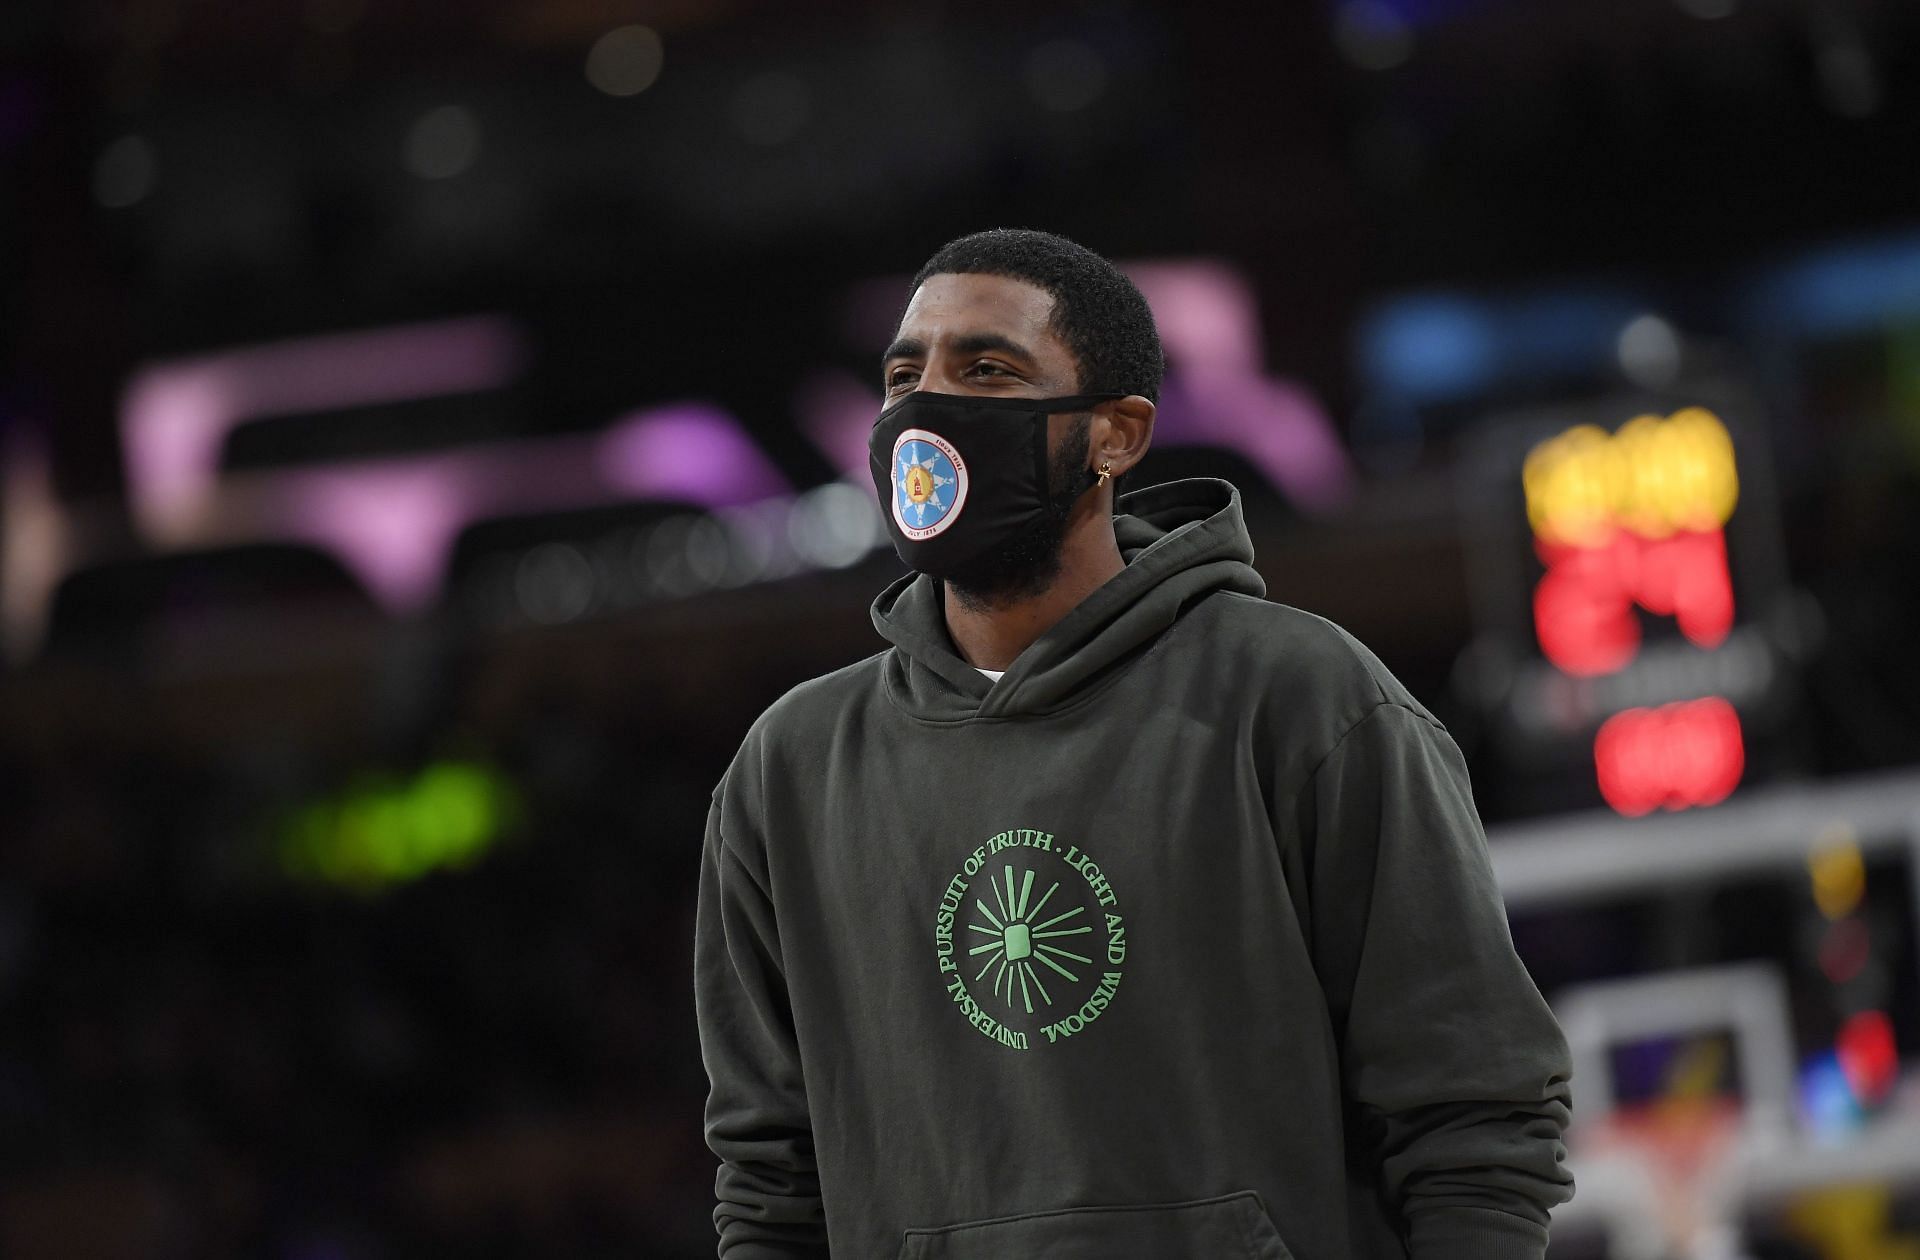 Kyrie Irving #11 of the Brooklyn Nets during a preseason game against the Los Angeles Lakers at Staples Center on October 3, 2021 in Los Angeles, California.